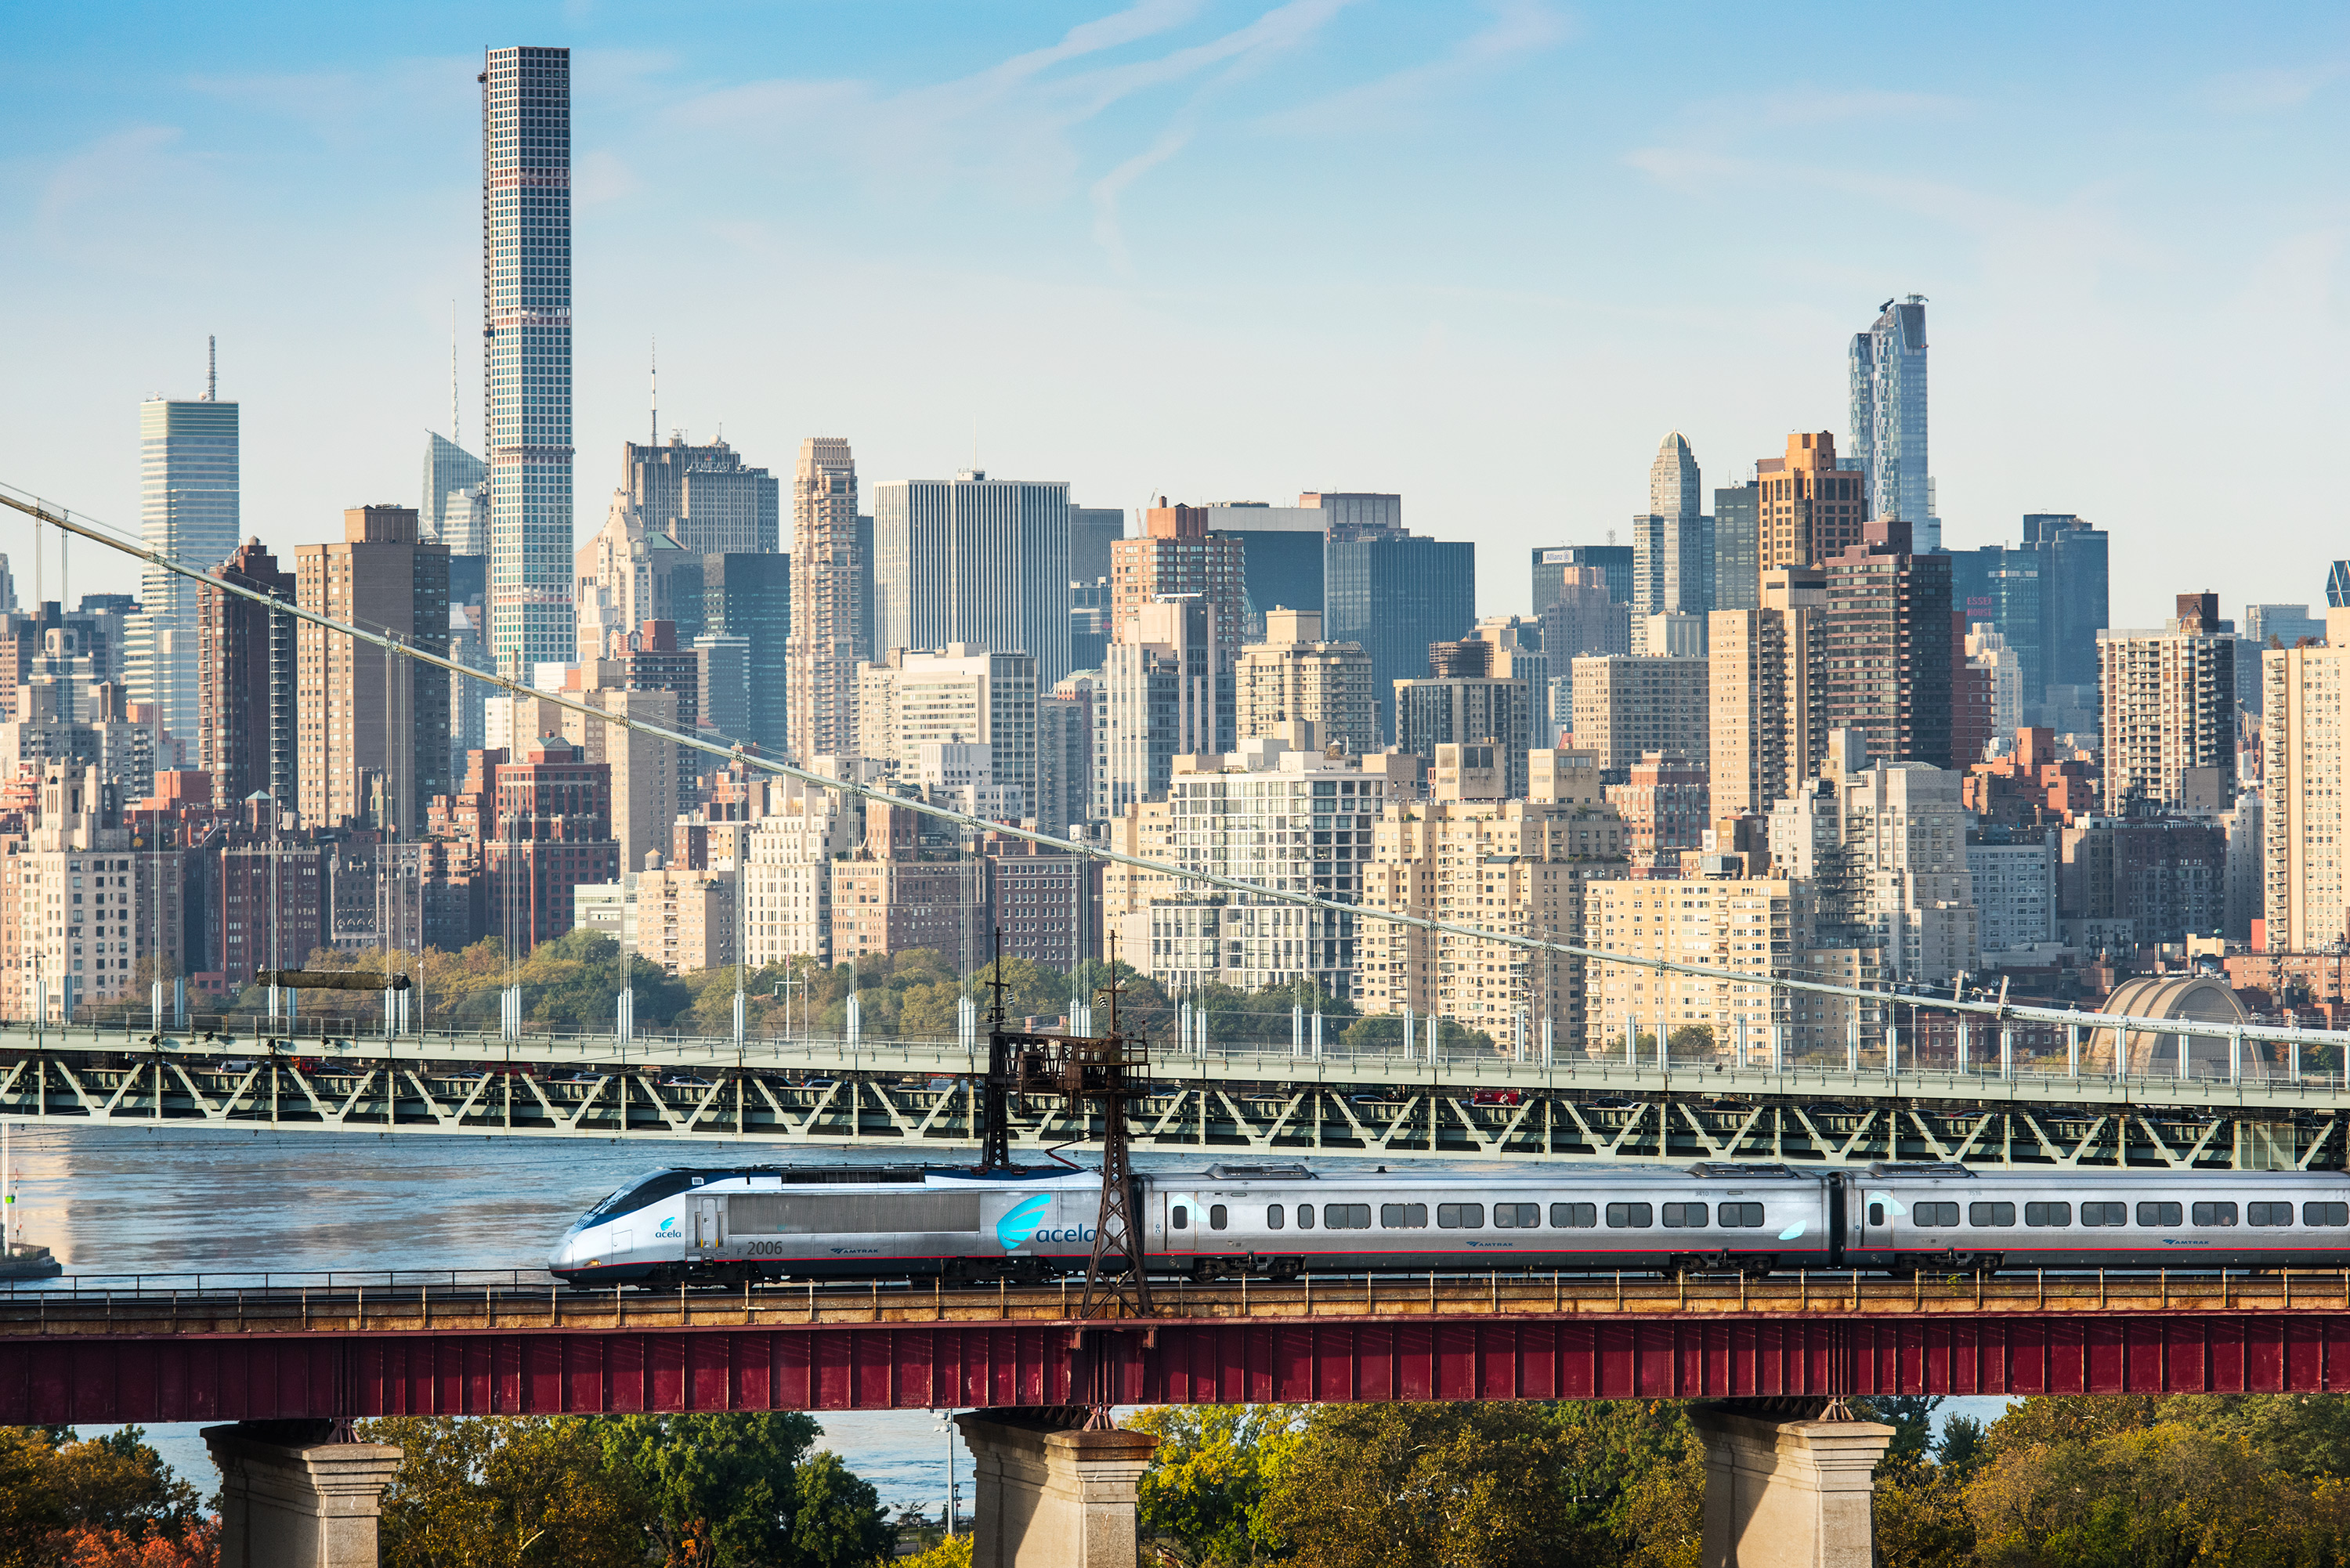 It’s Time for a New Era of Investment in Amtrak